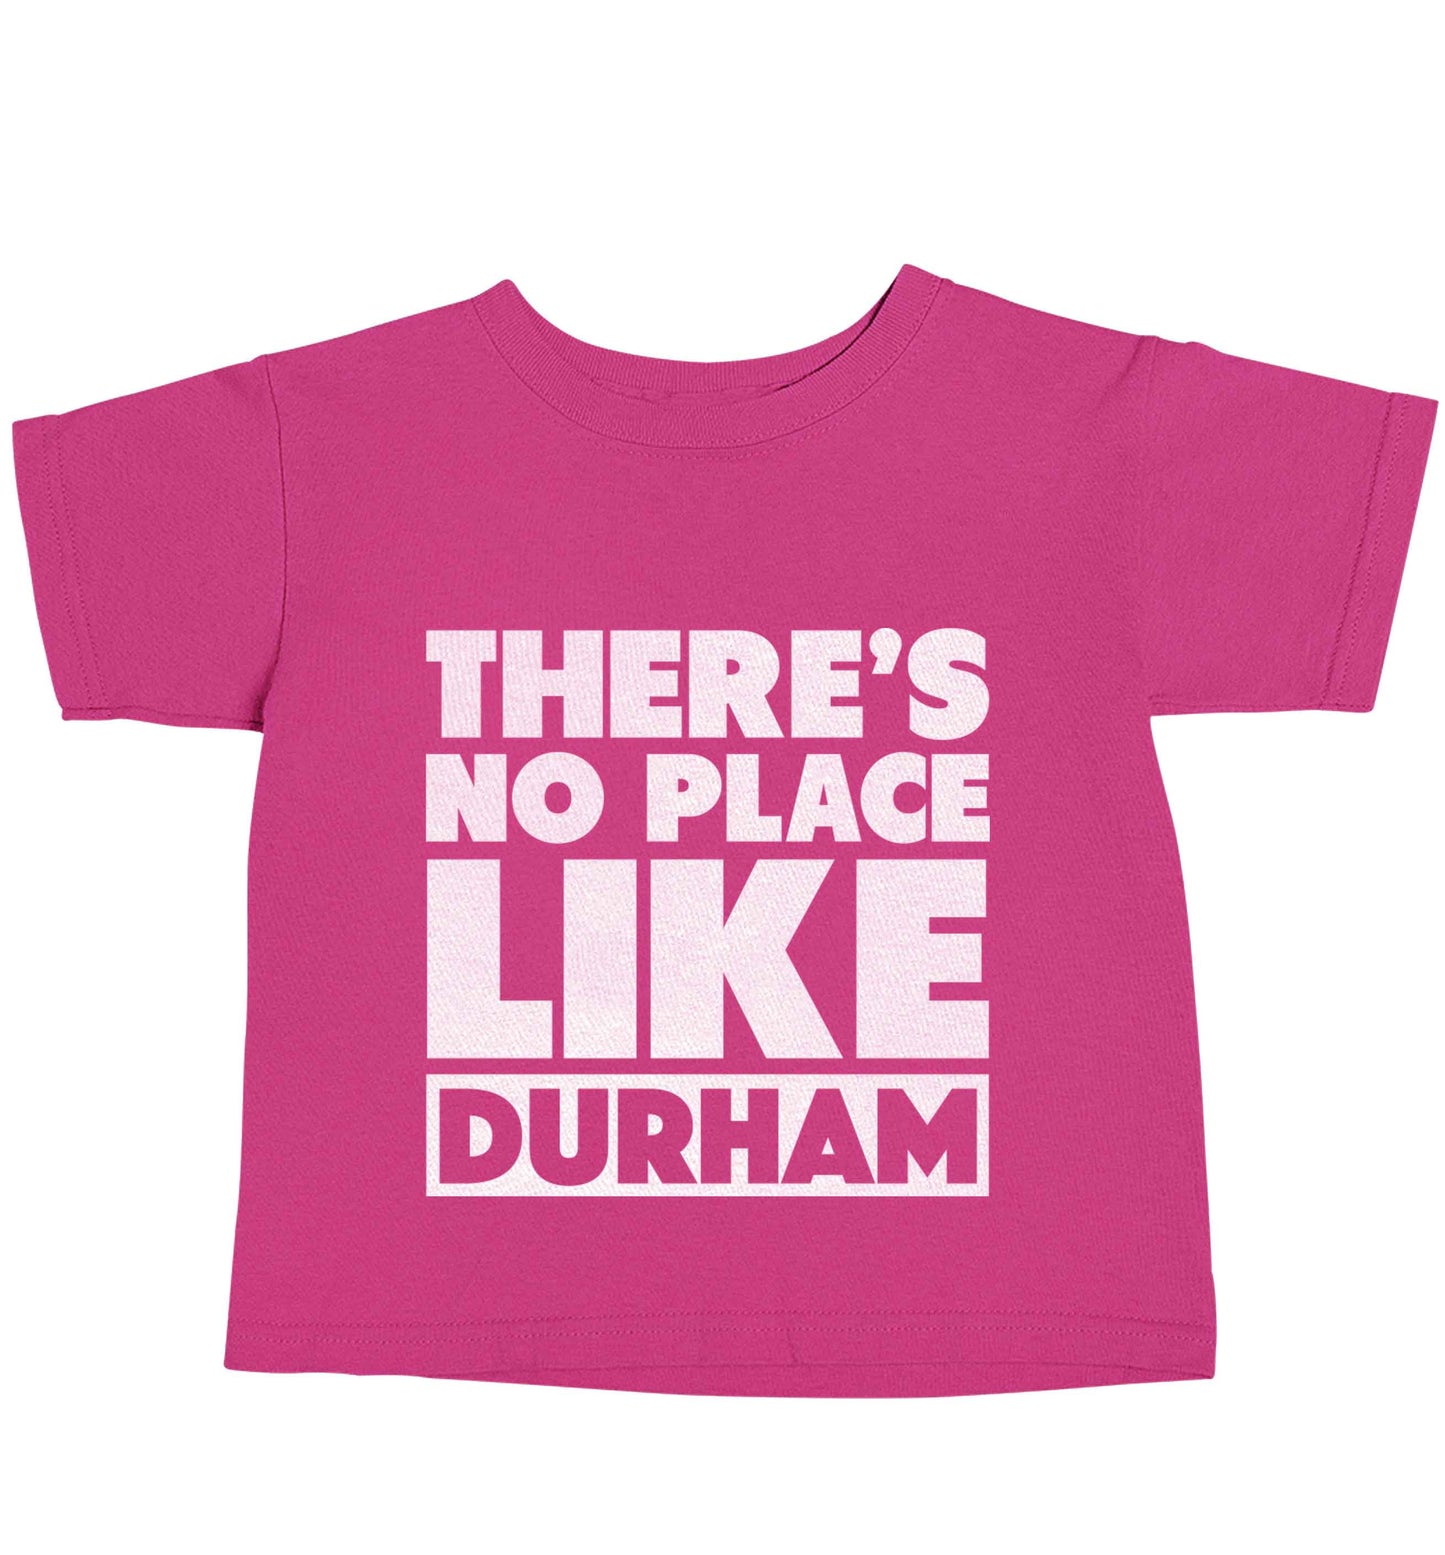 There's no place like Durham pink baby toddler Tshirt 2 Years